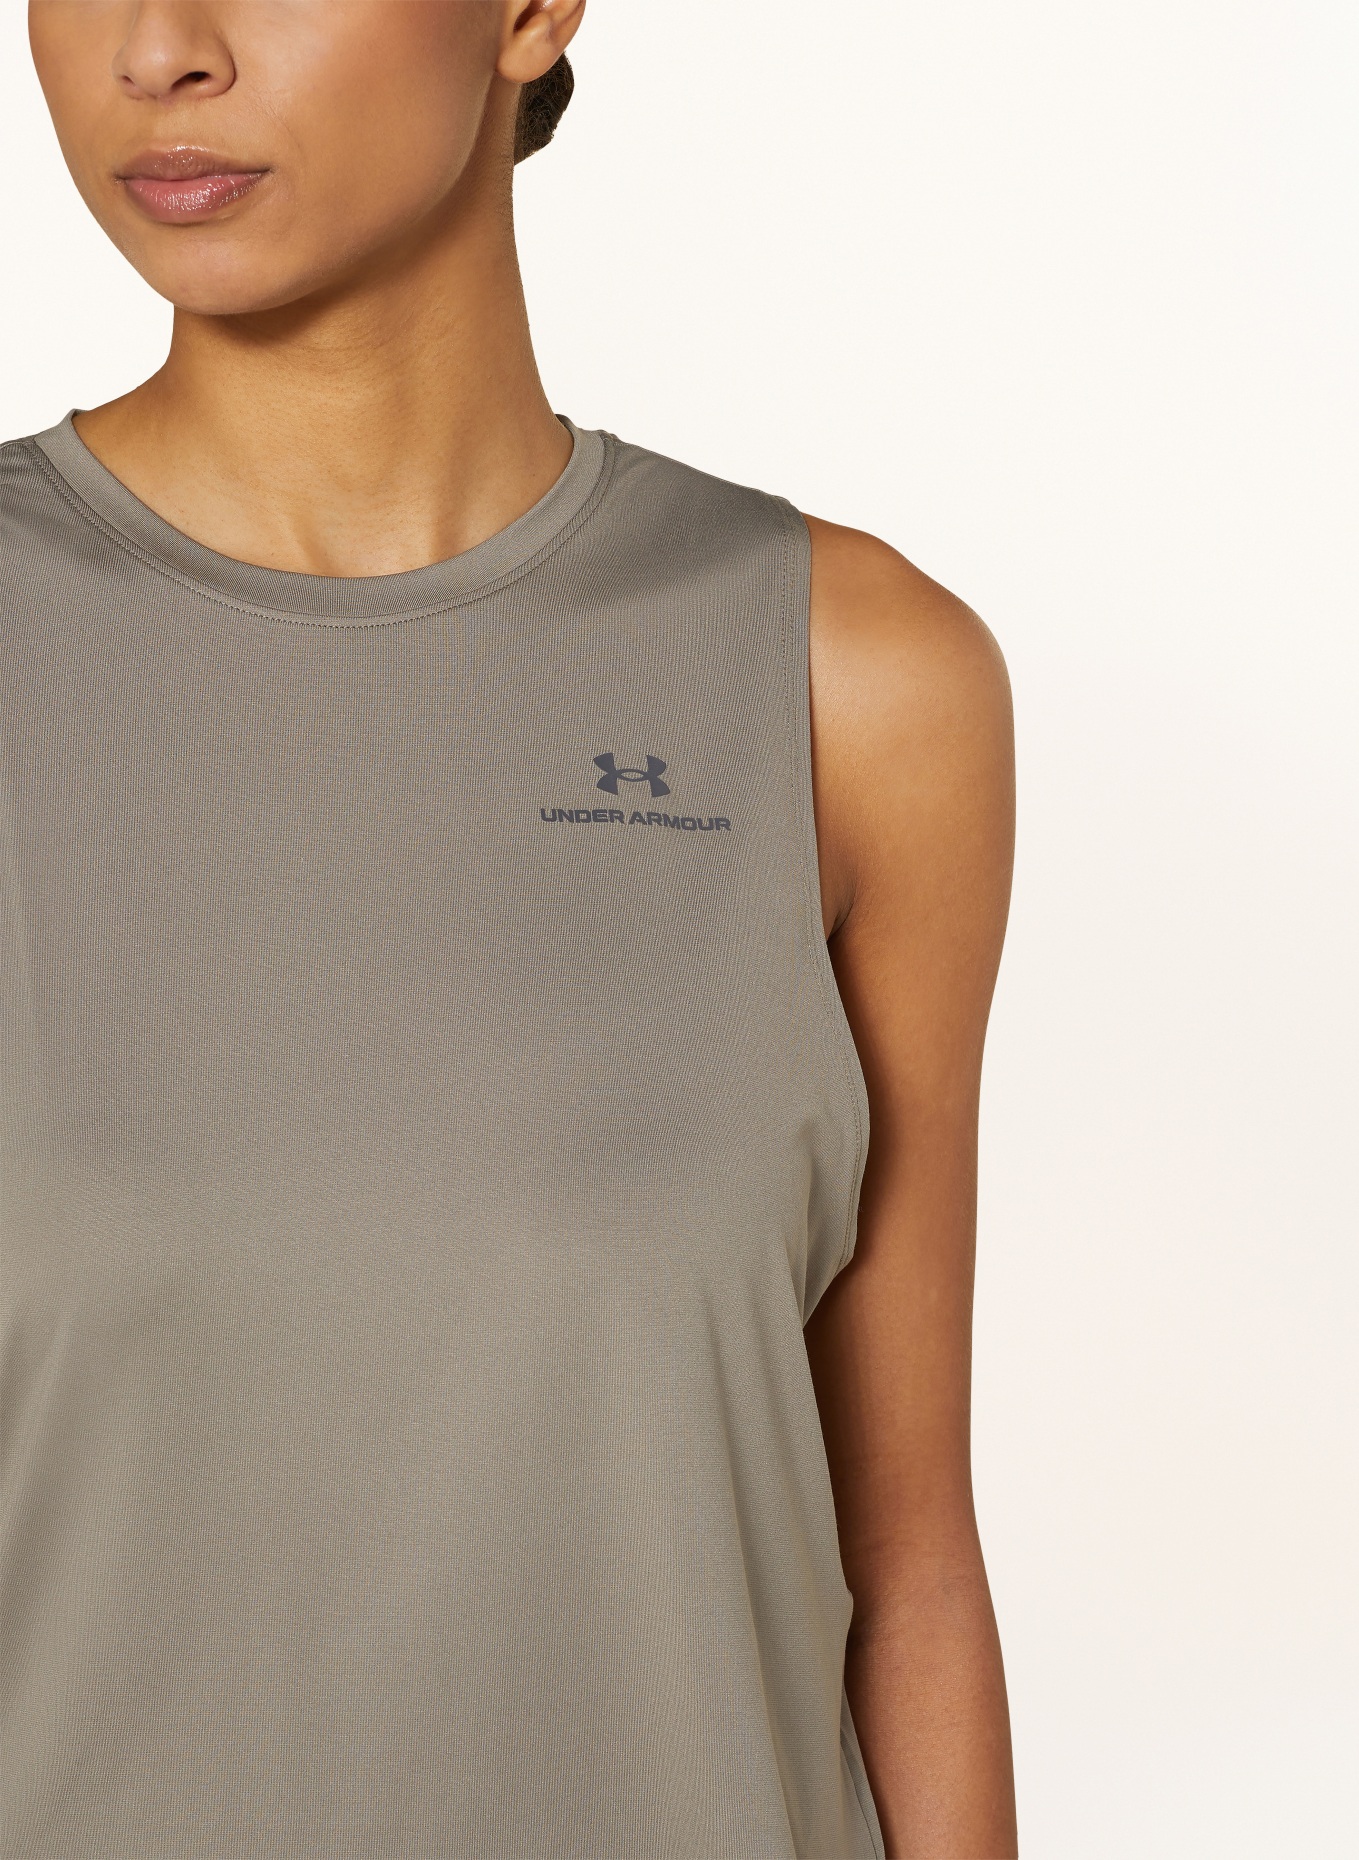 UNDER ARMOUR Tank top VANISH ELITE, Color: TAUPE (Image 4)